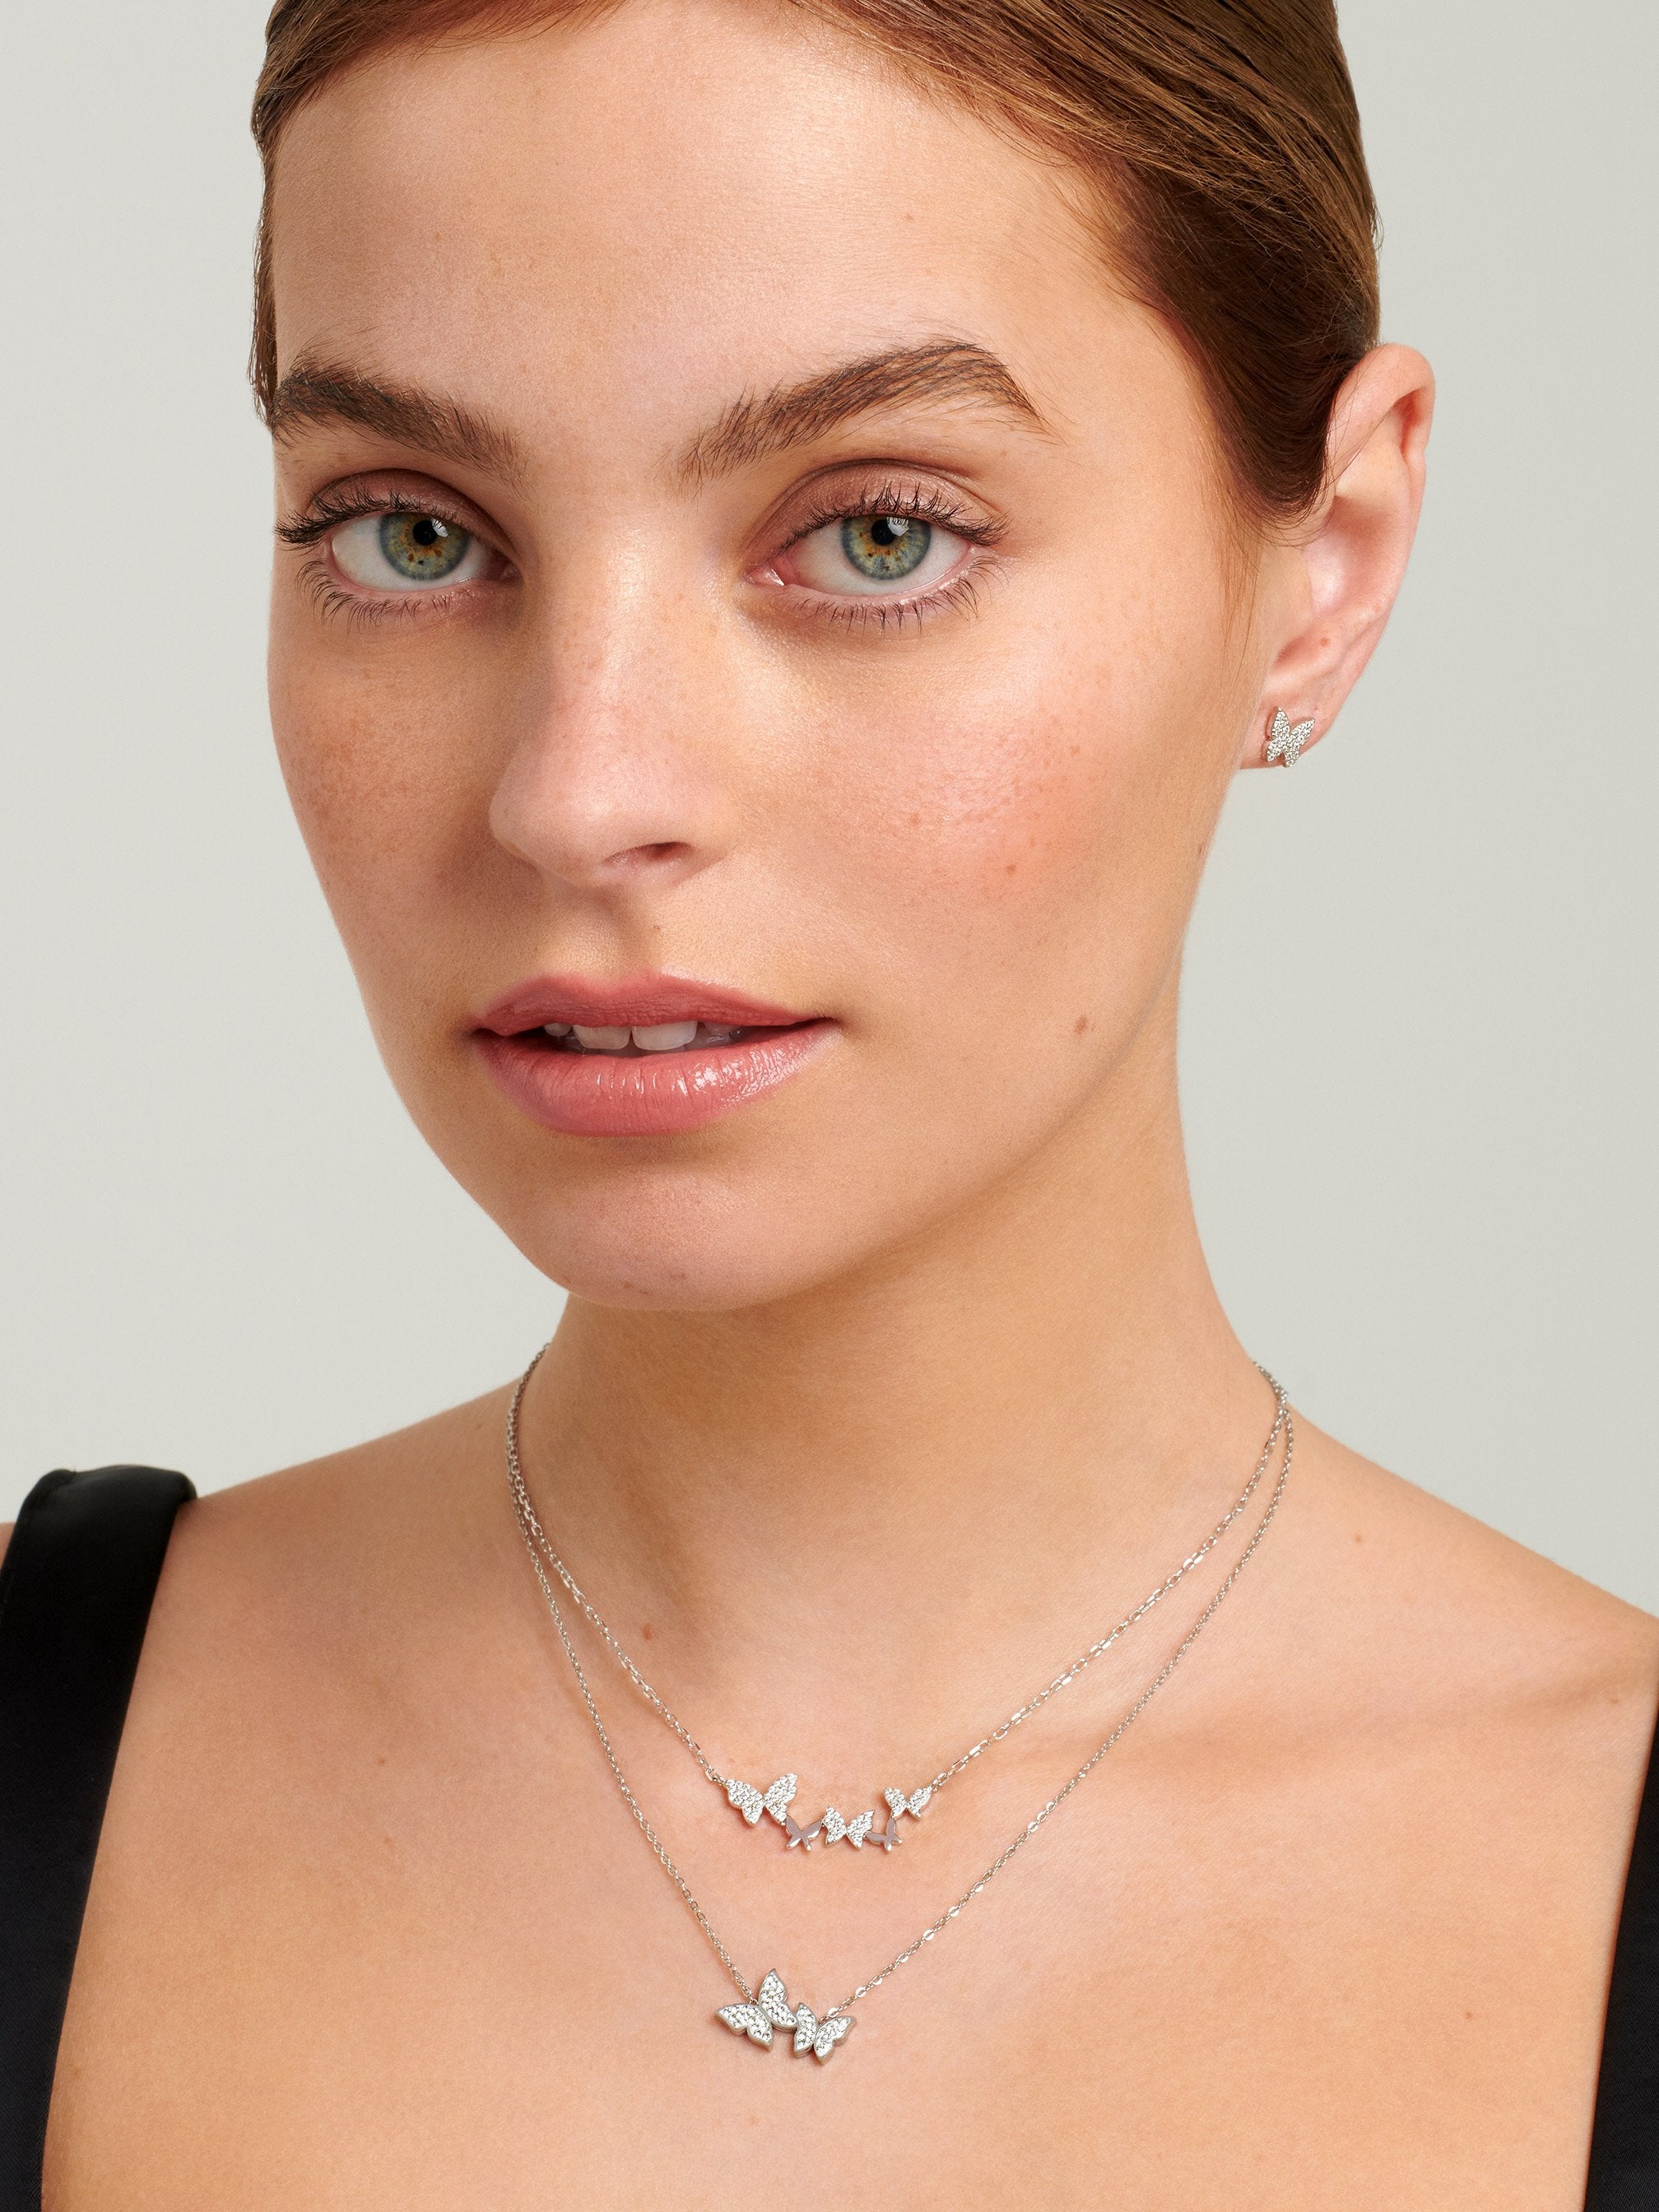 Female model wearing two different butterfly necklaces in silver layered together.